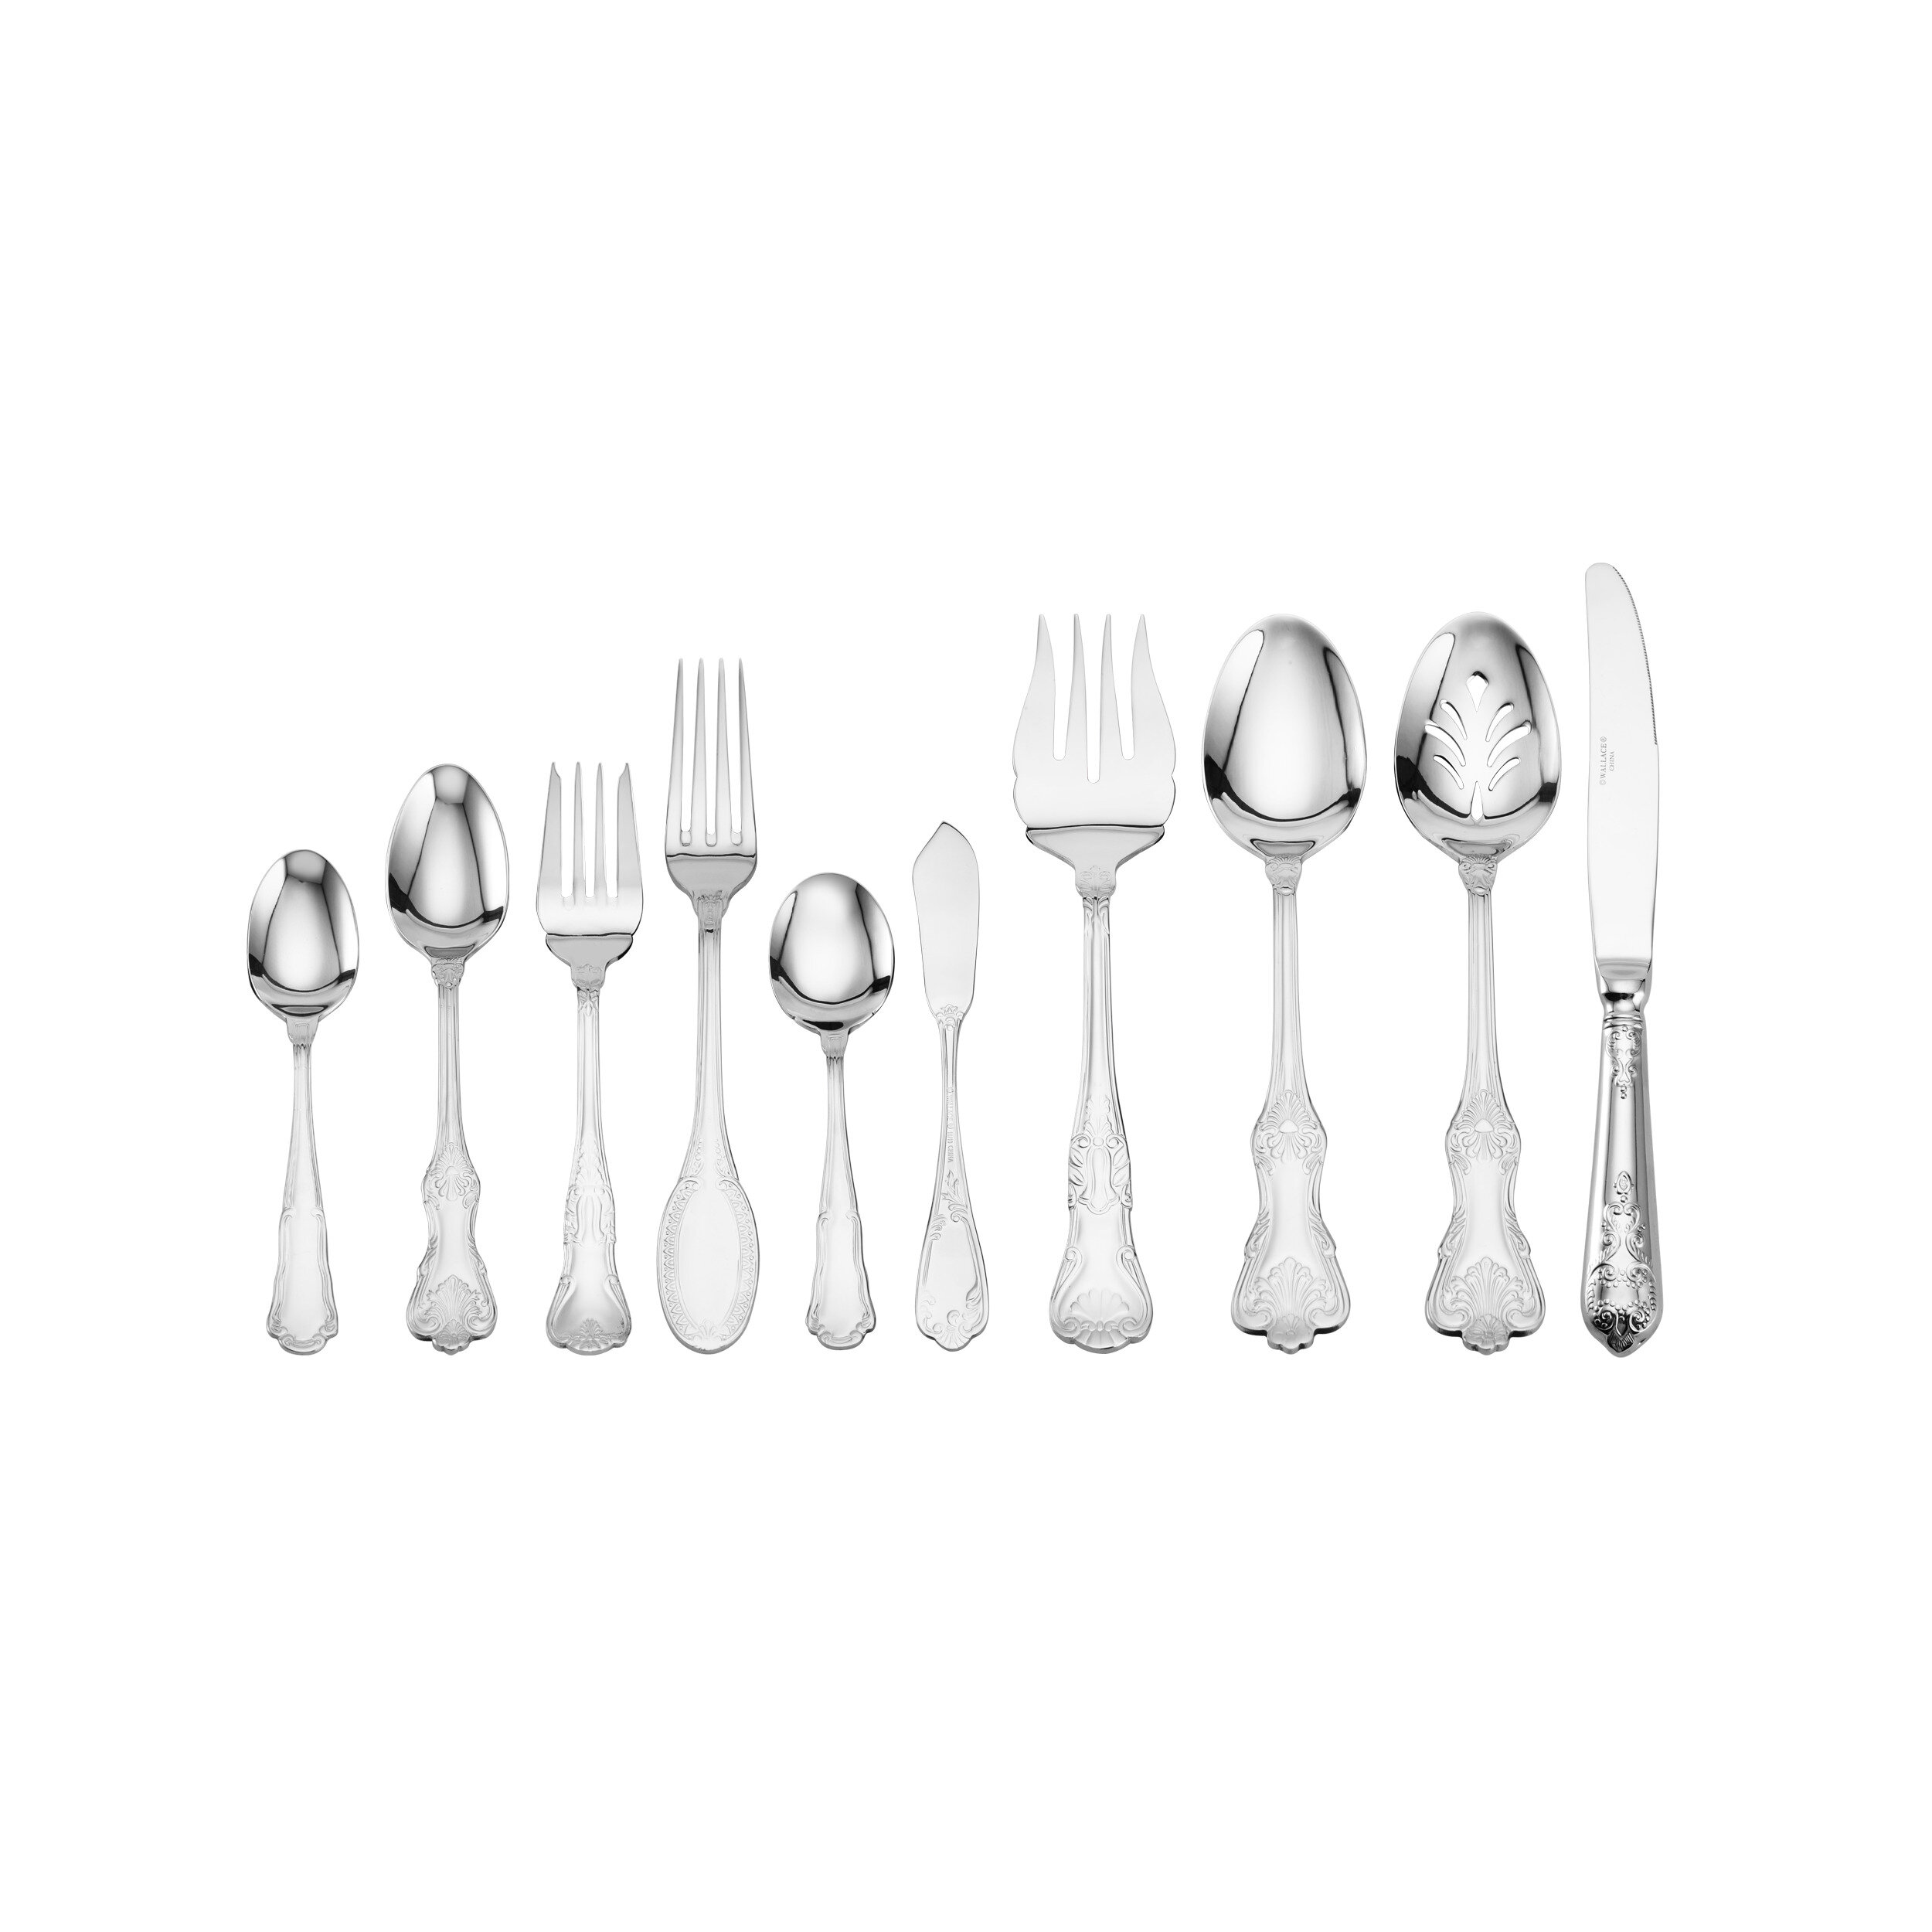 wallace stainless flatware sets